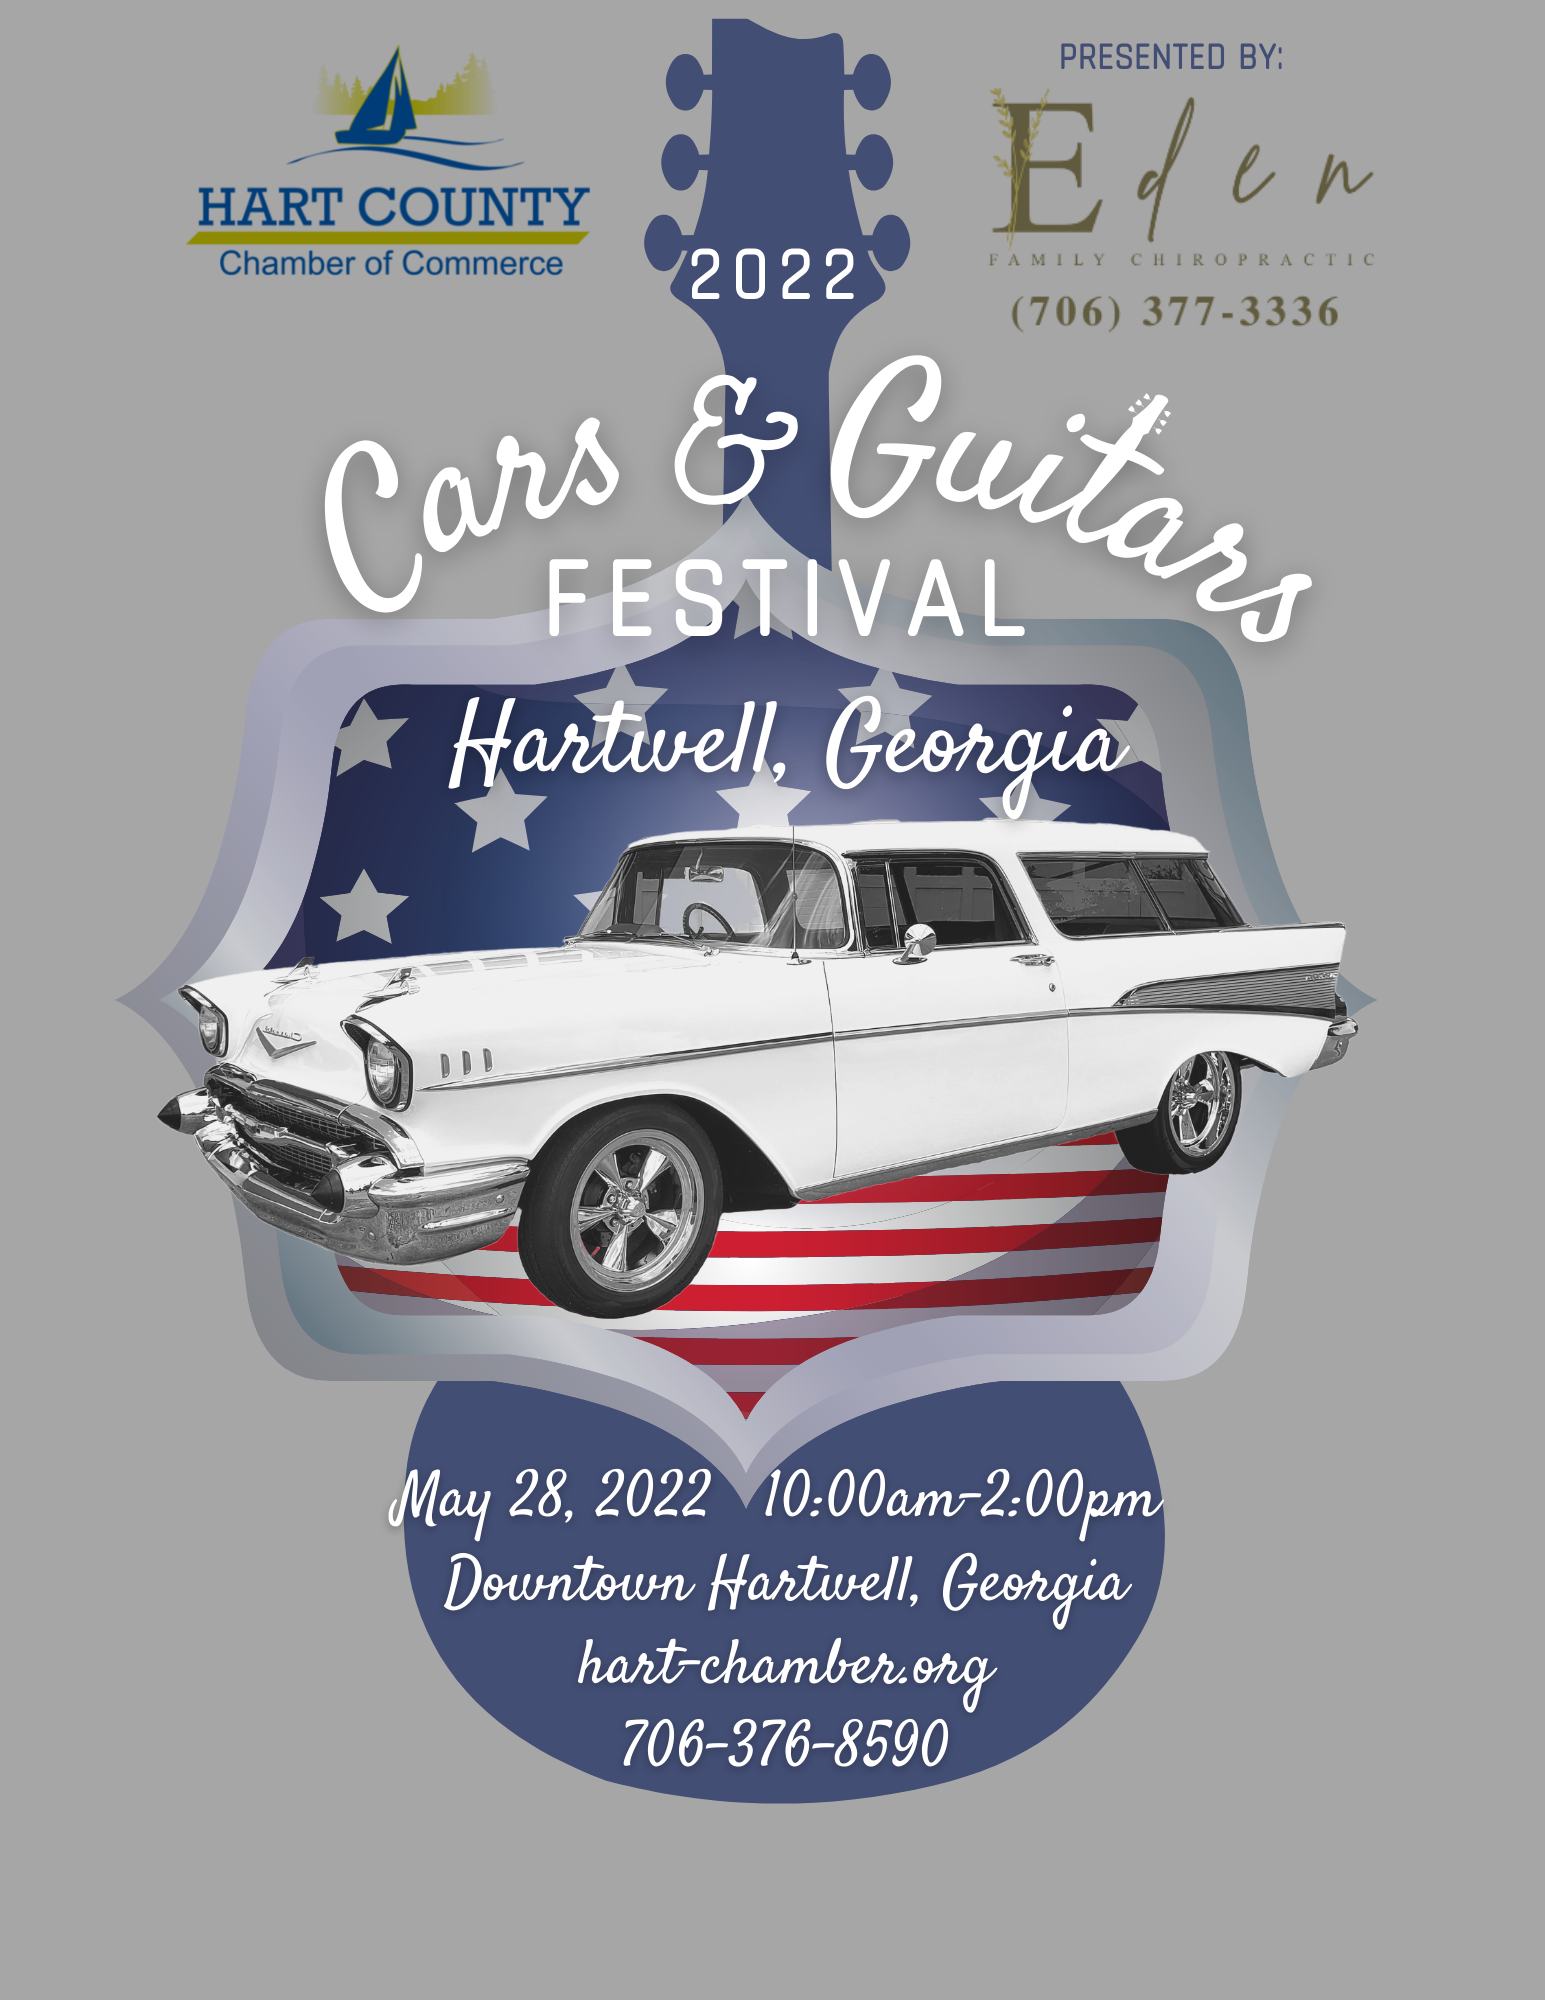 Cars & Guitars, Music Festival Round Out Holiday Weekend in Hart Co